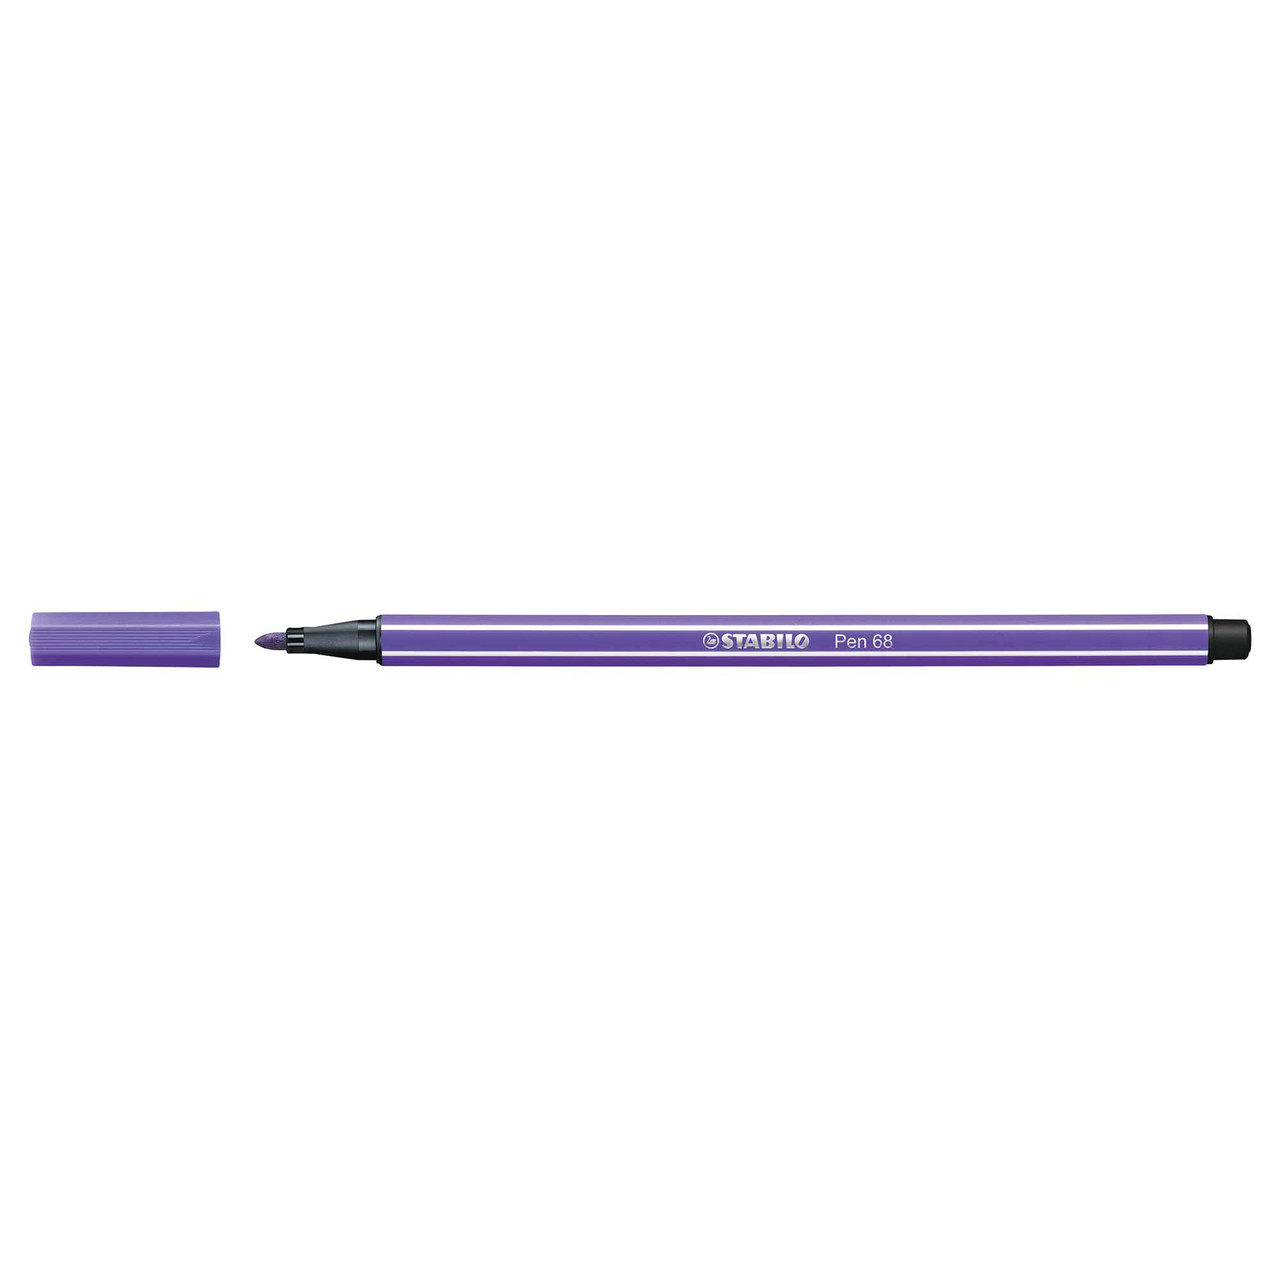 Stabilo Pen 68 Marker Light Lilac - Wet Paint Artists' Materials and Framing